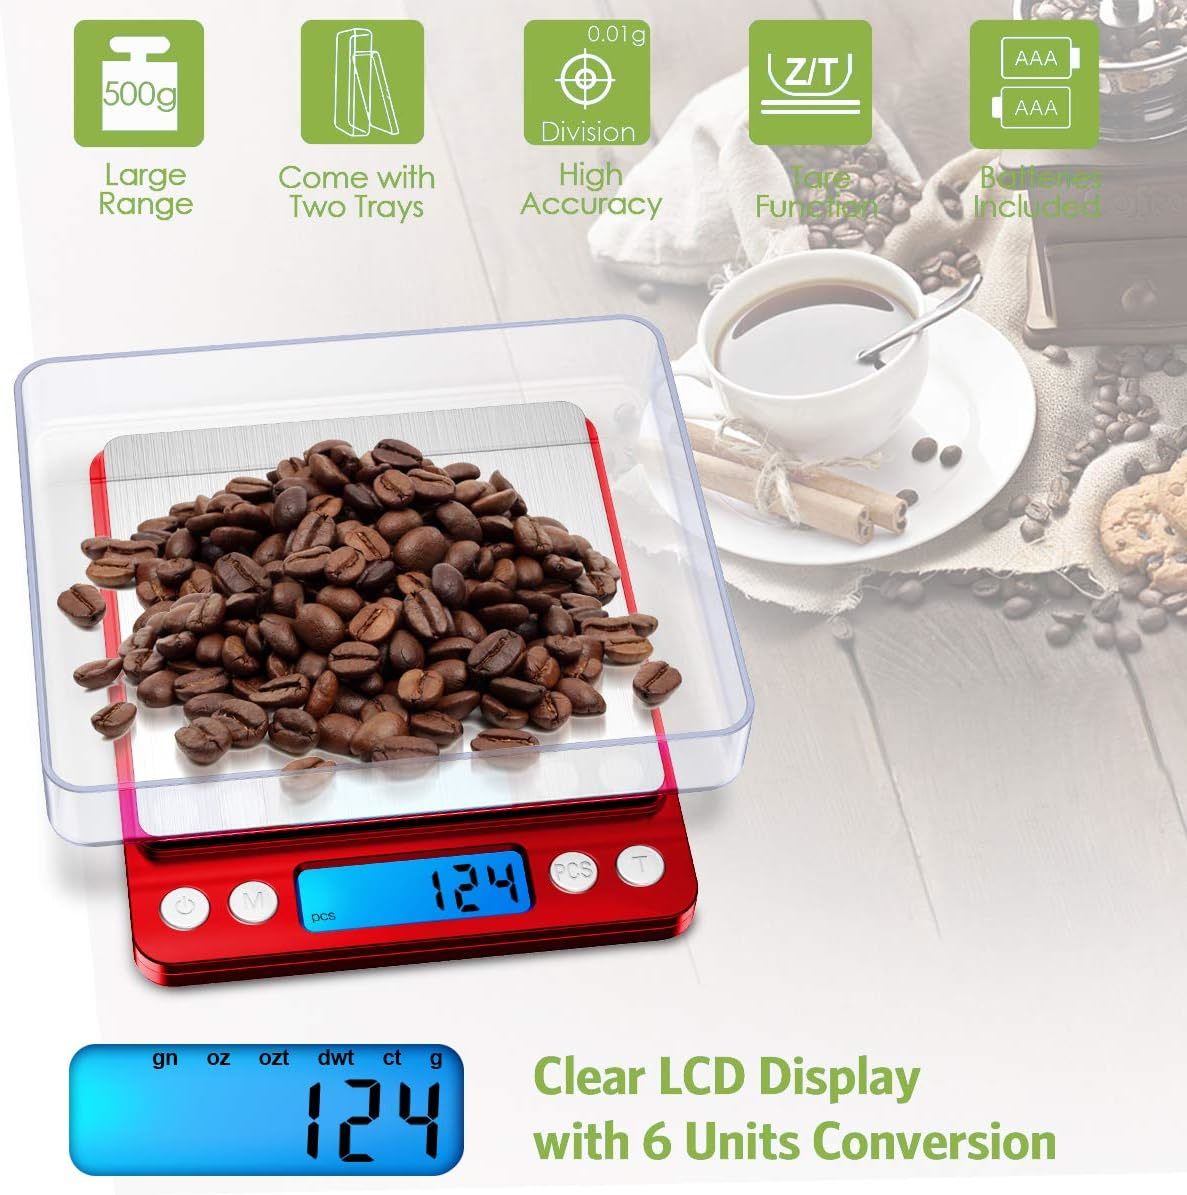  Gram Scale 220g/ 0.01g, Digital Pocket Scale 100g Calibration  Weight,Mini Jewelry Scale, Kitchen Scale,6 Units Conversion, Tare & LCD  Display, Auto Off, : Home & Kitchen